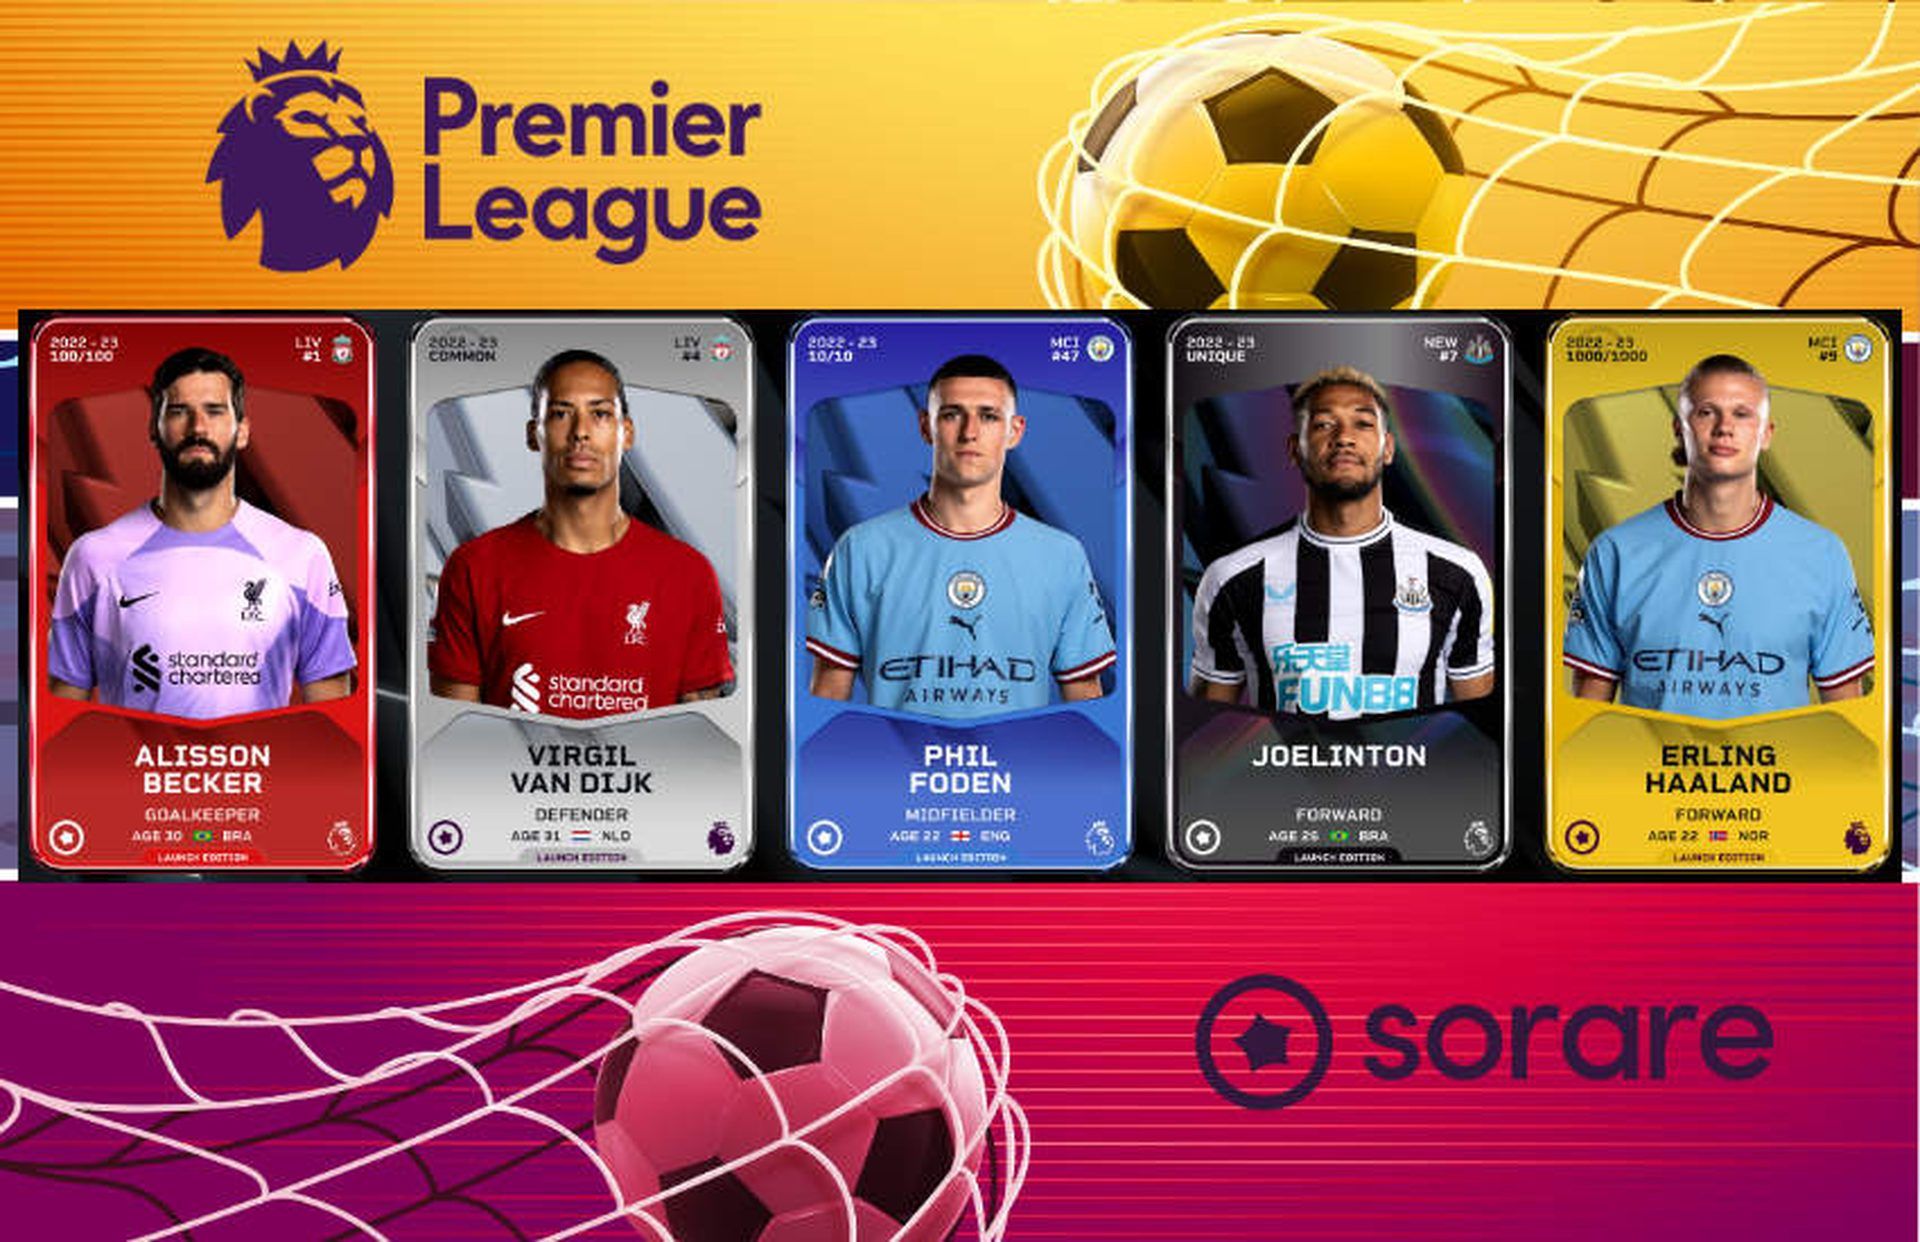 Premier League NFTs are on the way with Sorare